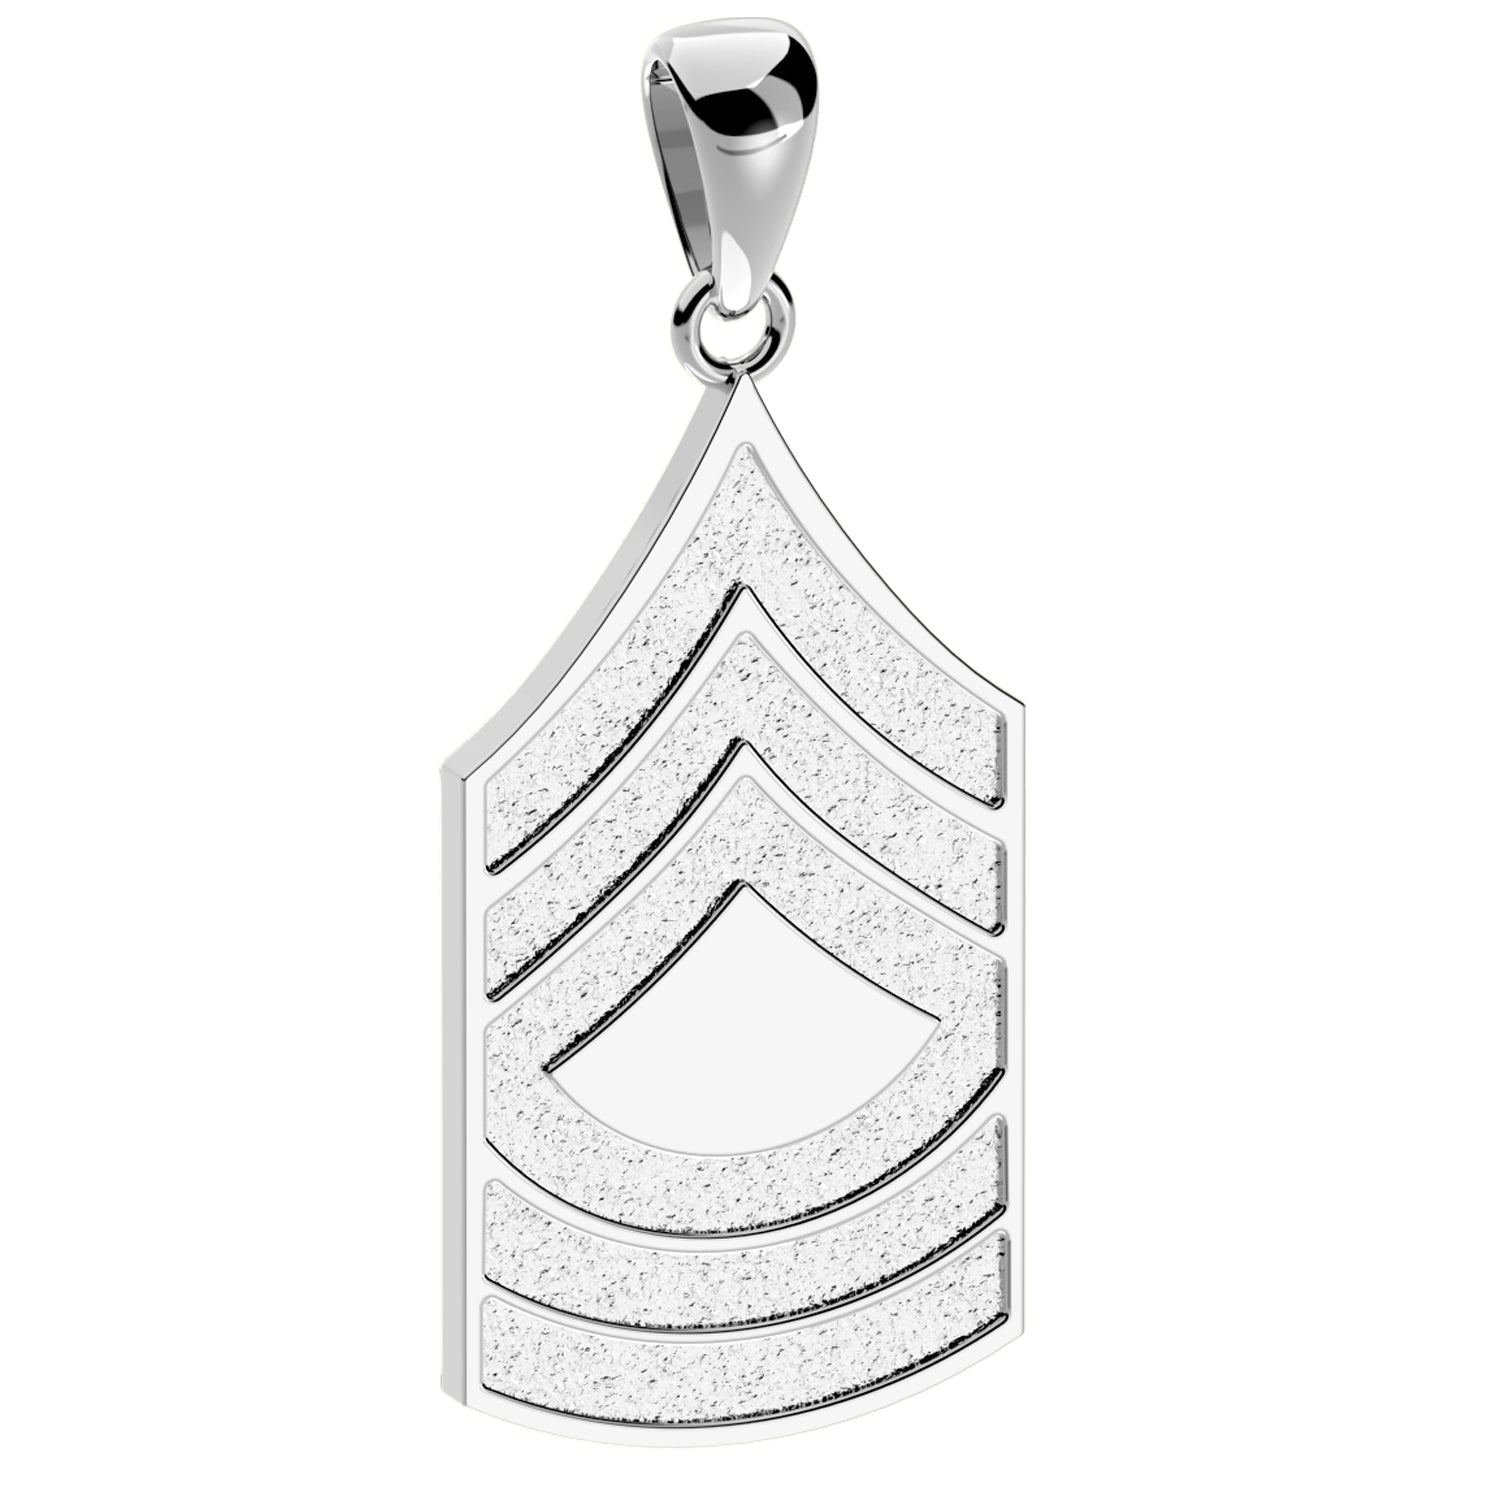 Men's 10k or 14k Yellow or White Gold Master Sergeant US Army Pendant - US Jewels